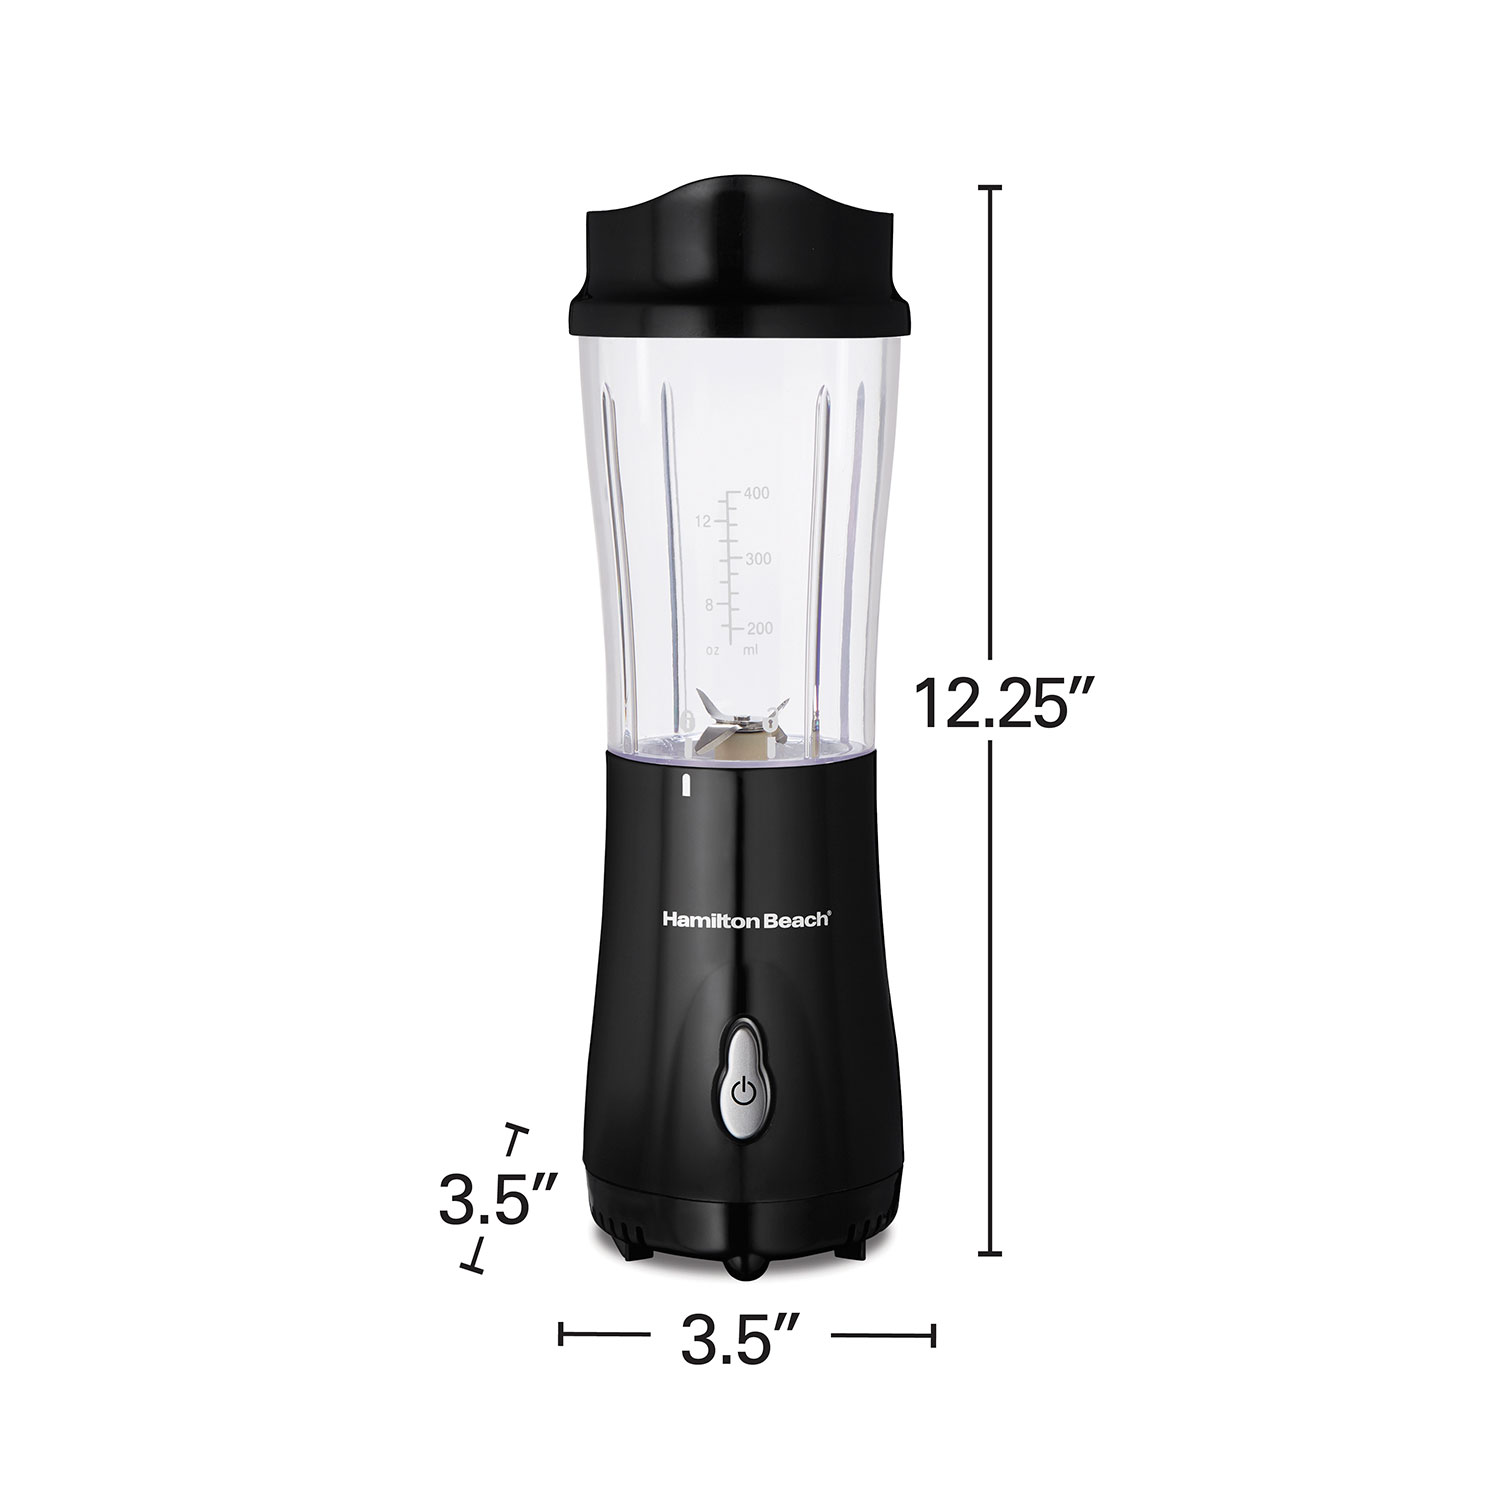 Hamilton Beach Personal Blender with Travel Lid for Smoothies and